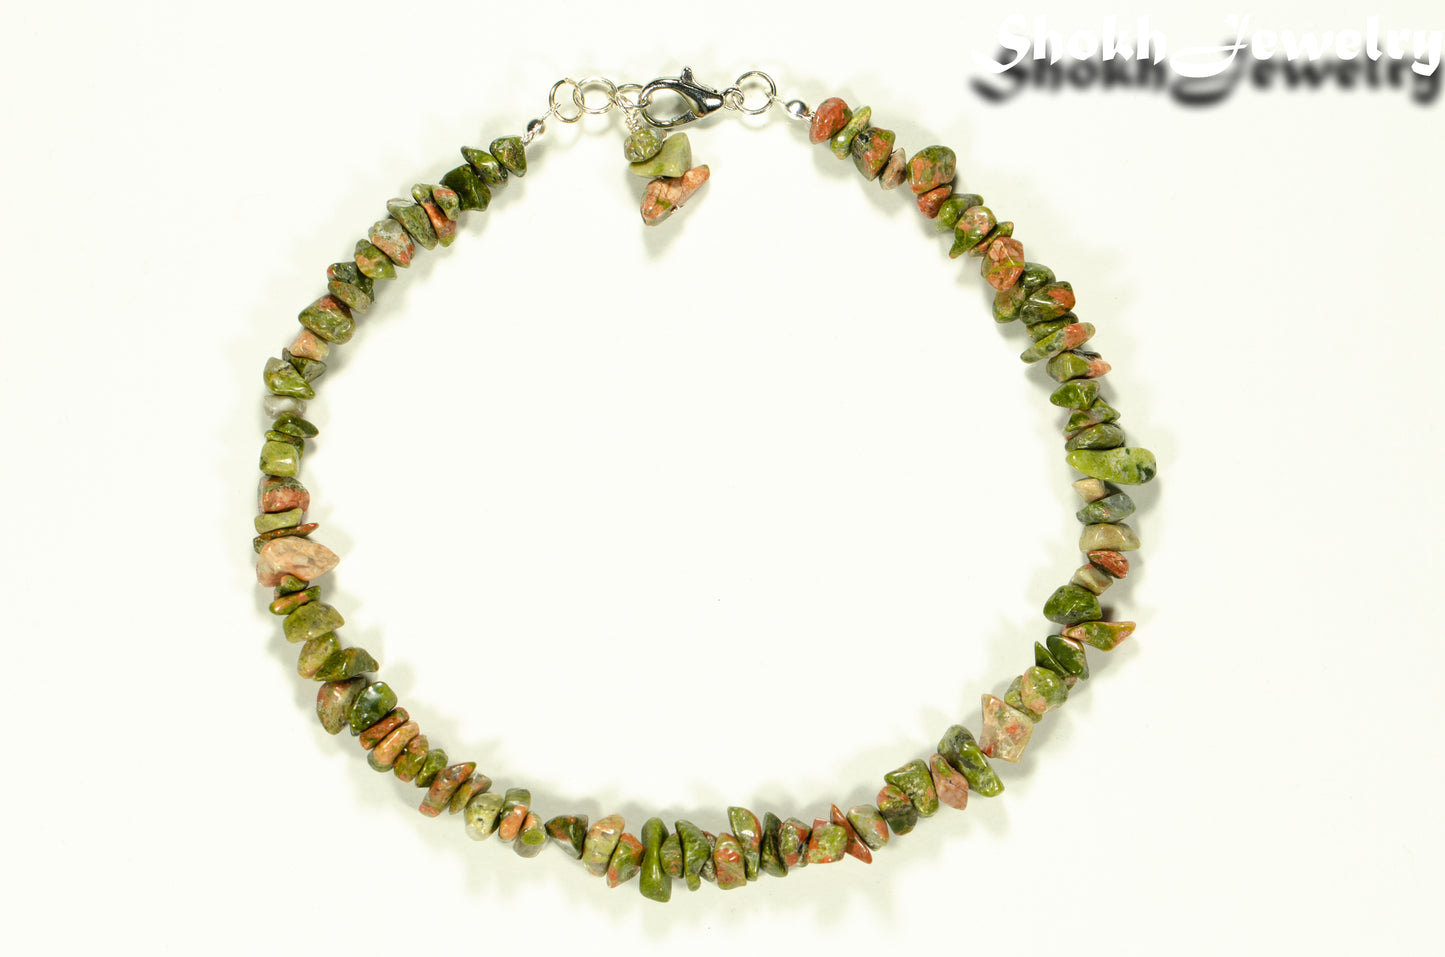 Top view of Natural Unakite Crystal Chip Anklet.